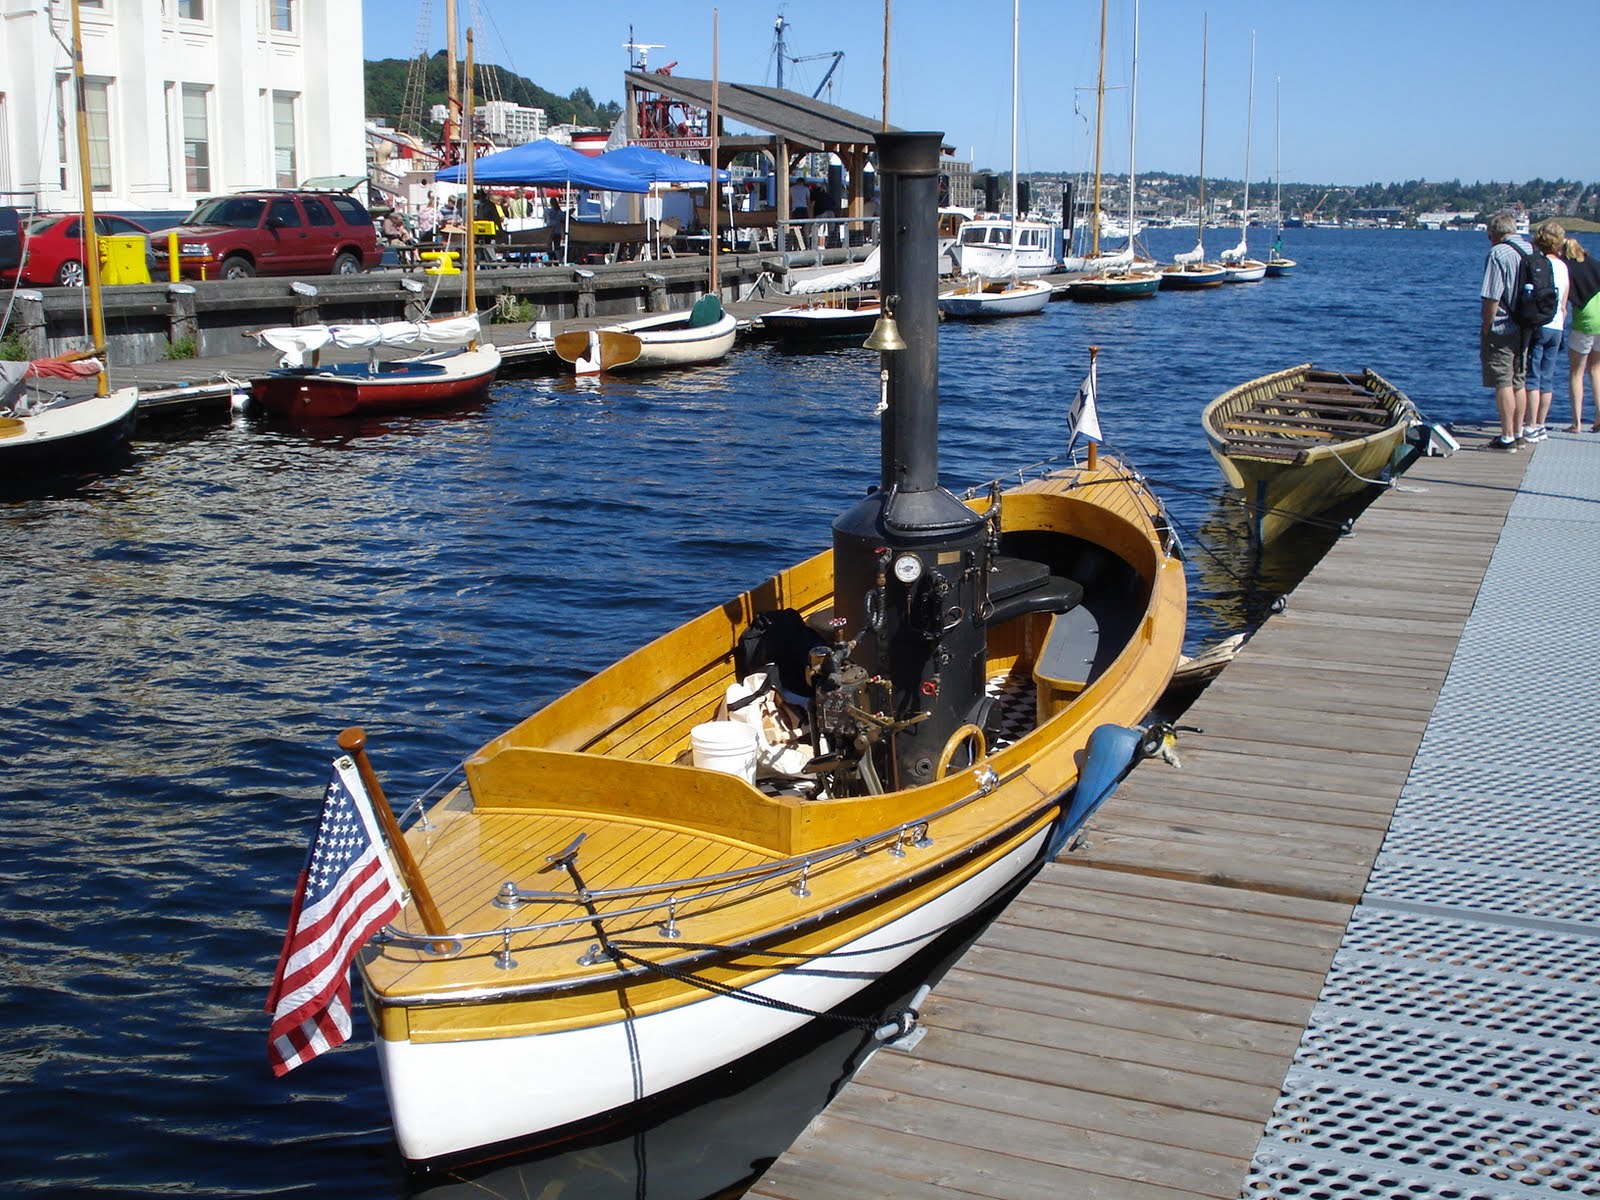 Sailing on Inland Seas: Home Built Boat Weekend, July 24th ...